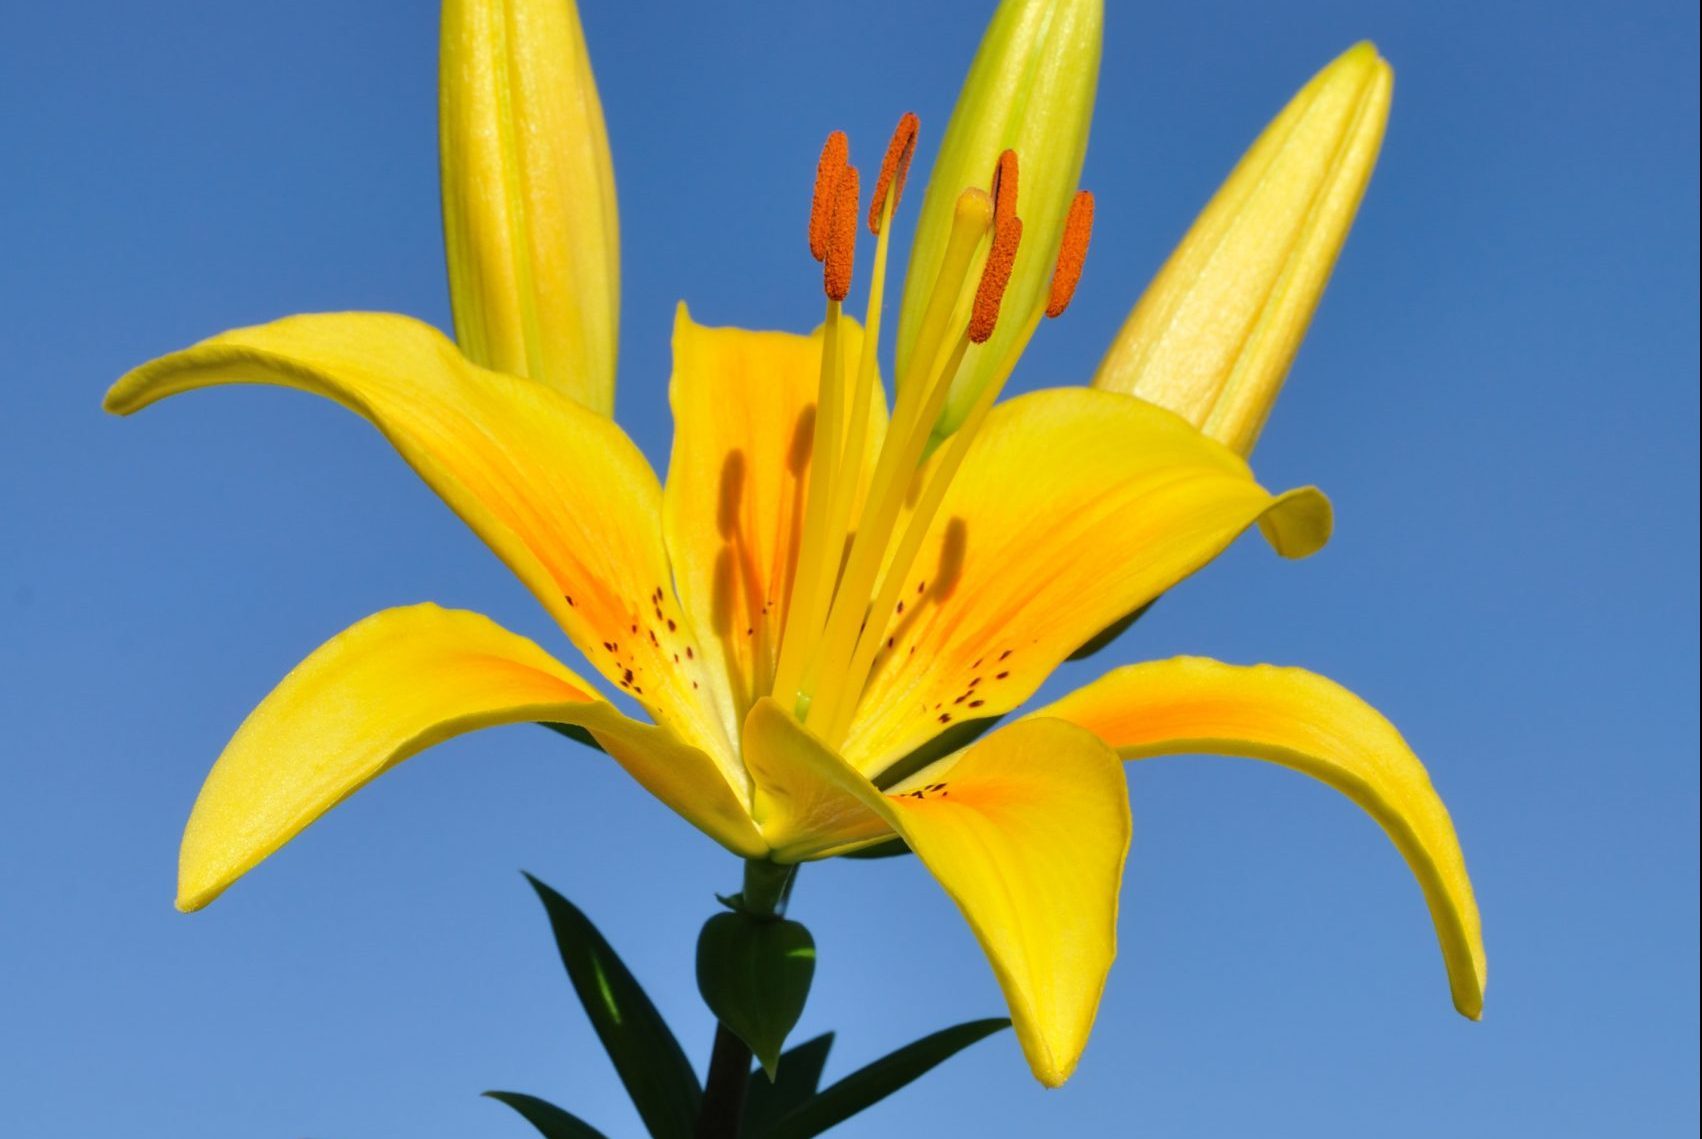 Stargazer Yellow Lily Flower Against a Blue Sky